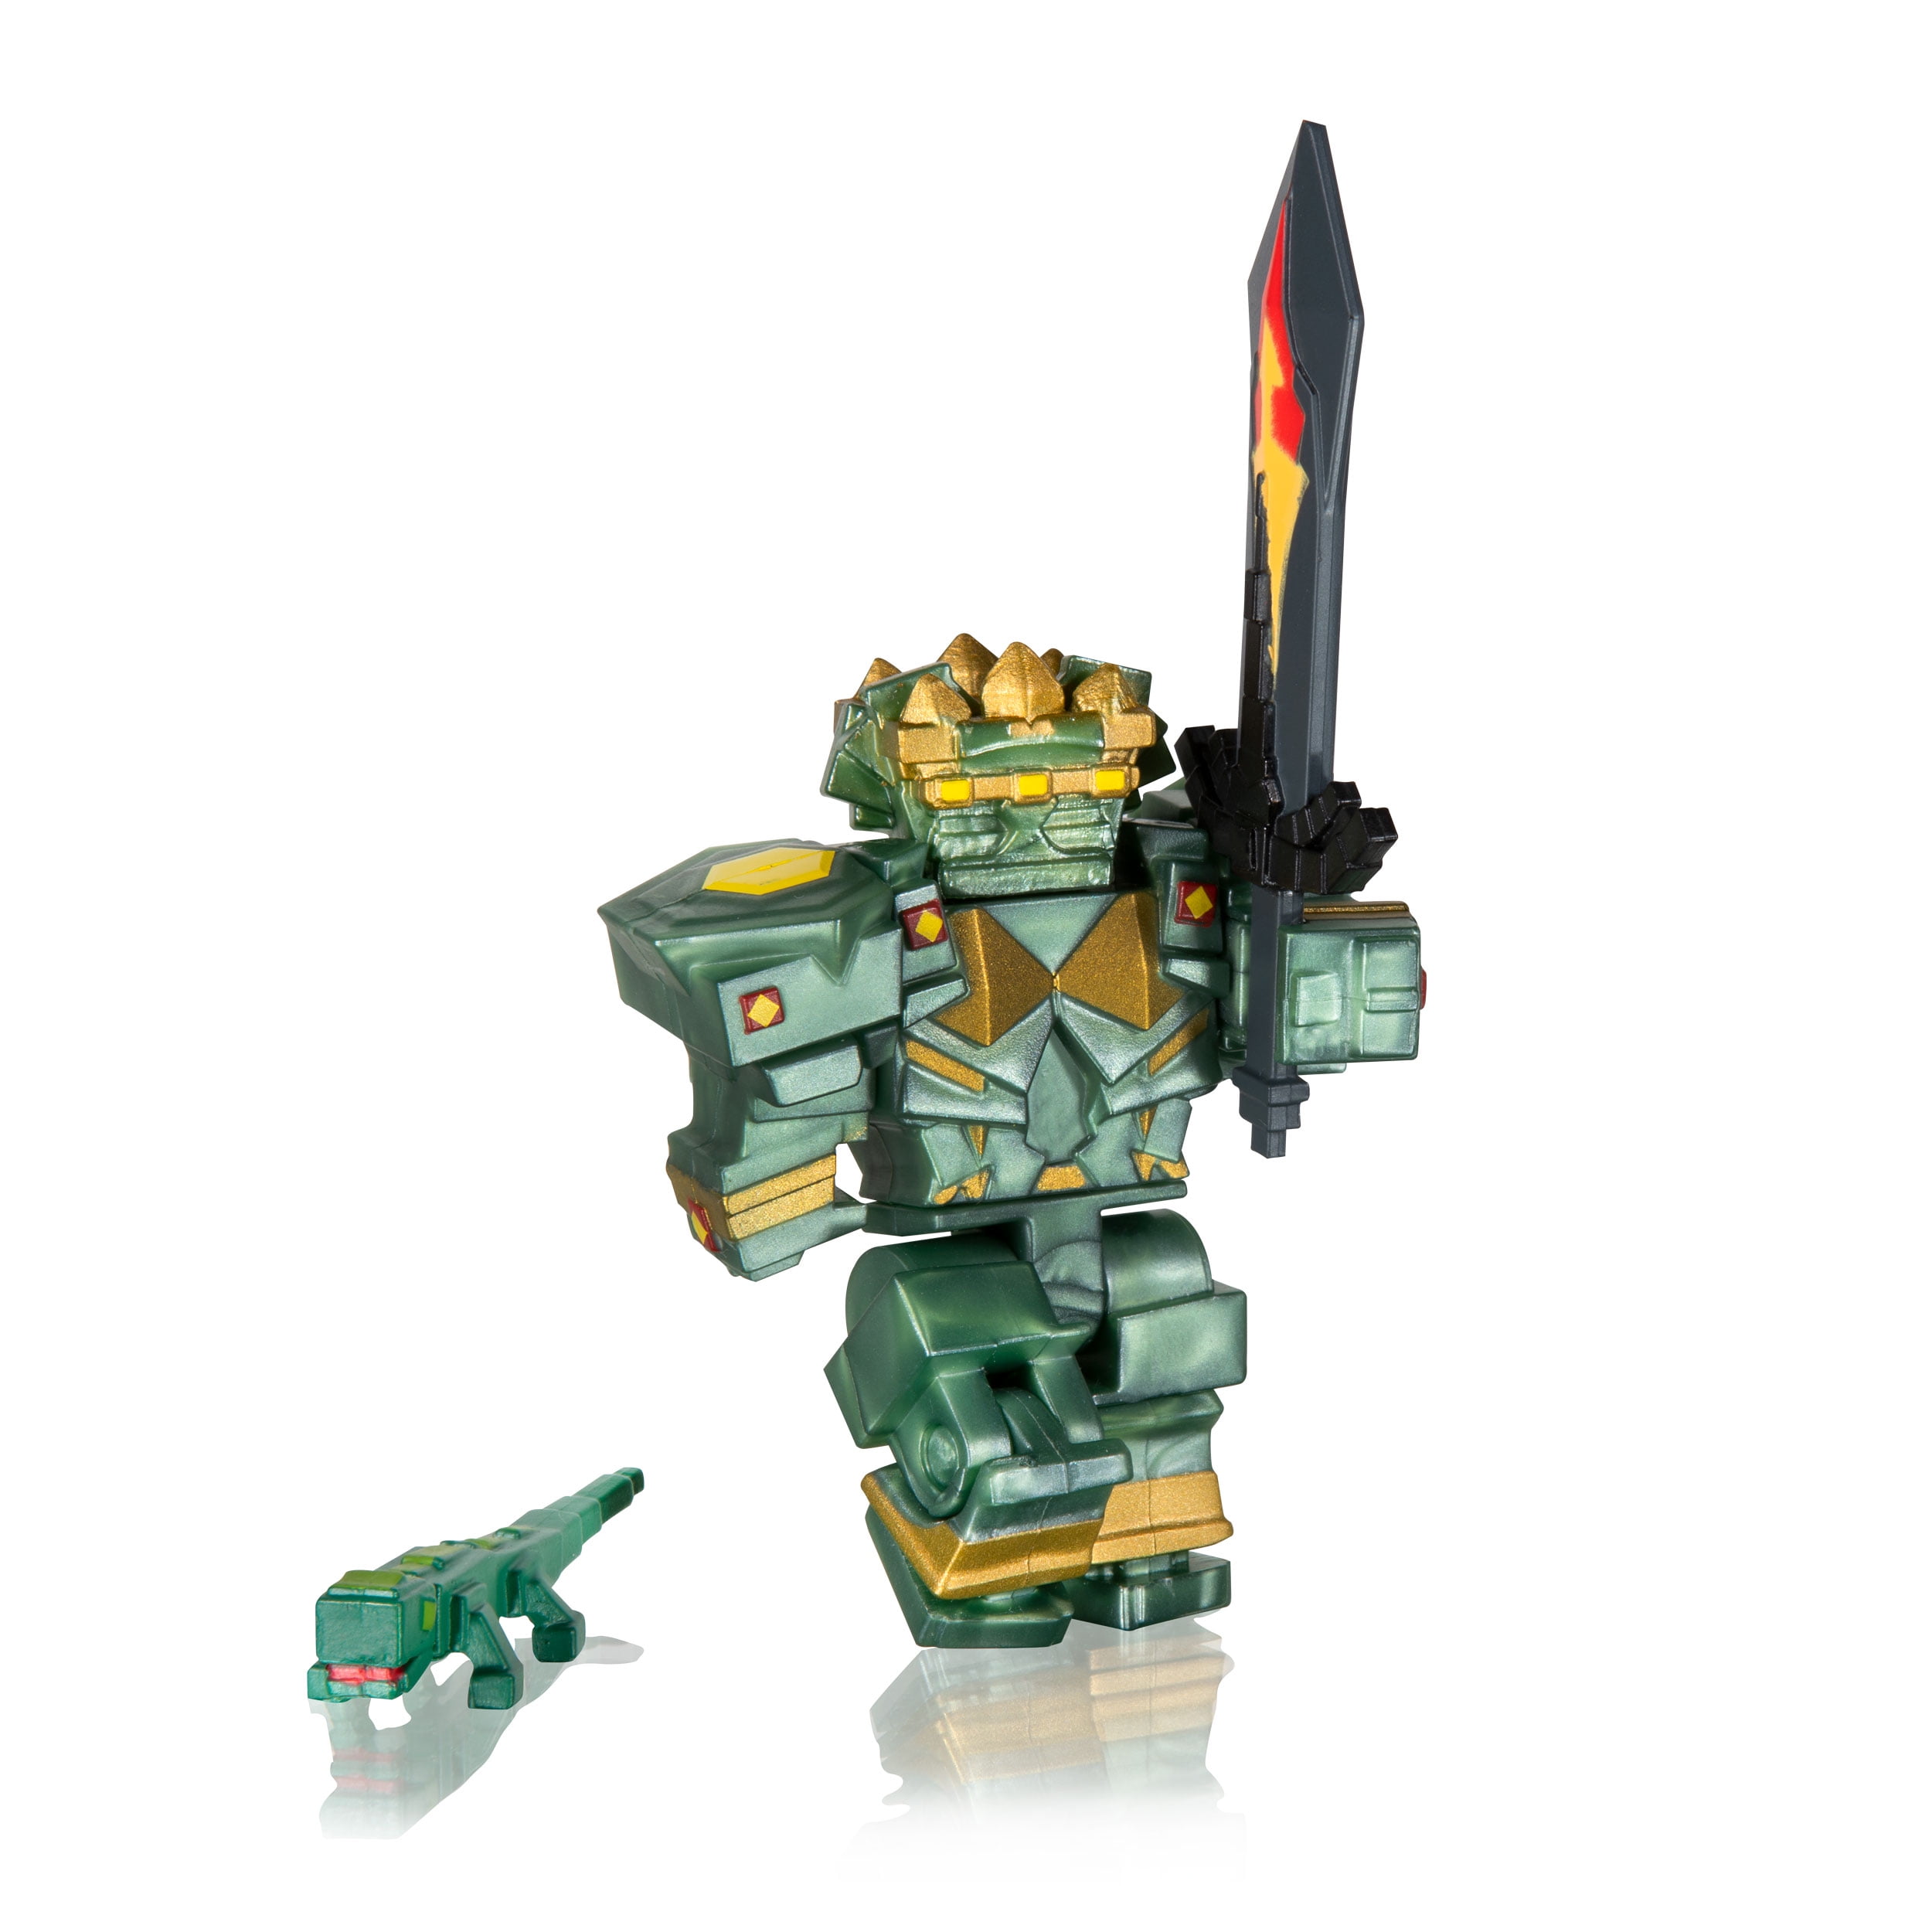 Roblox Action Collection 3 Inch 1 Figure Pack With Accessories Styles May Vary Includes Exclusive Virtual Item Walmart Com Walmart Com - amazon com roblox action collection queen of the treelands figure pack includes exclusive virtual item toys games